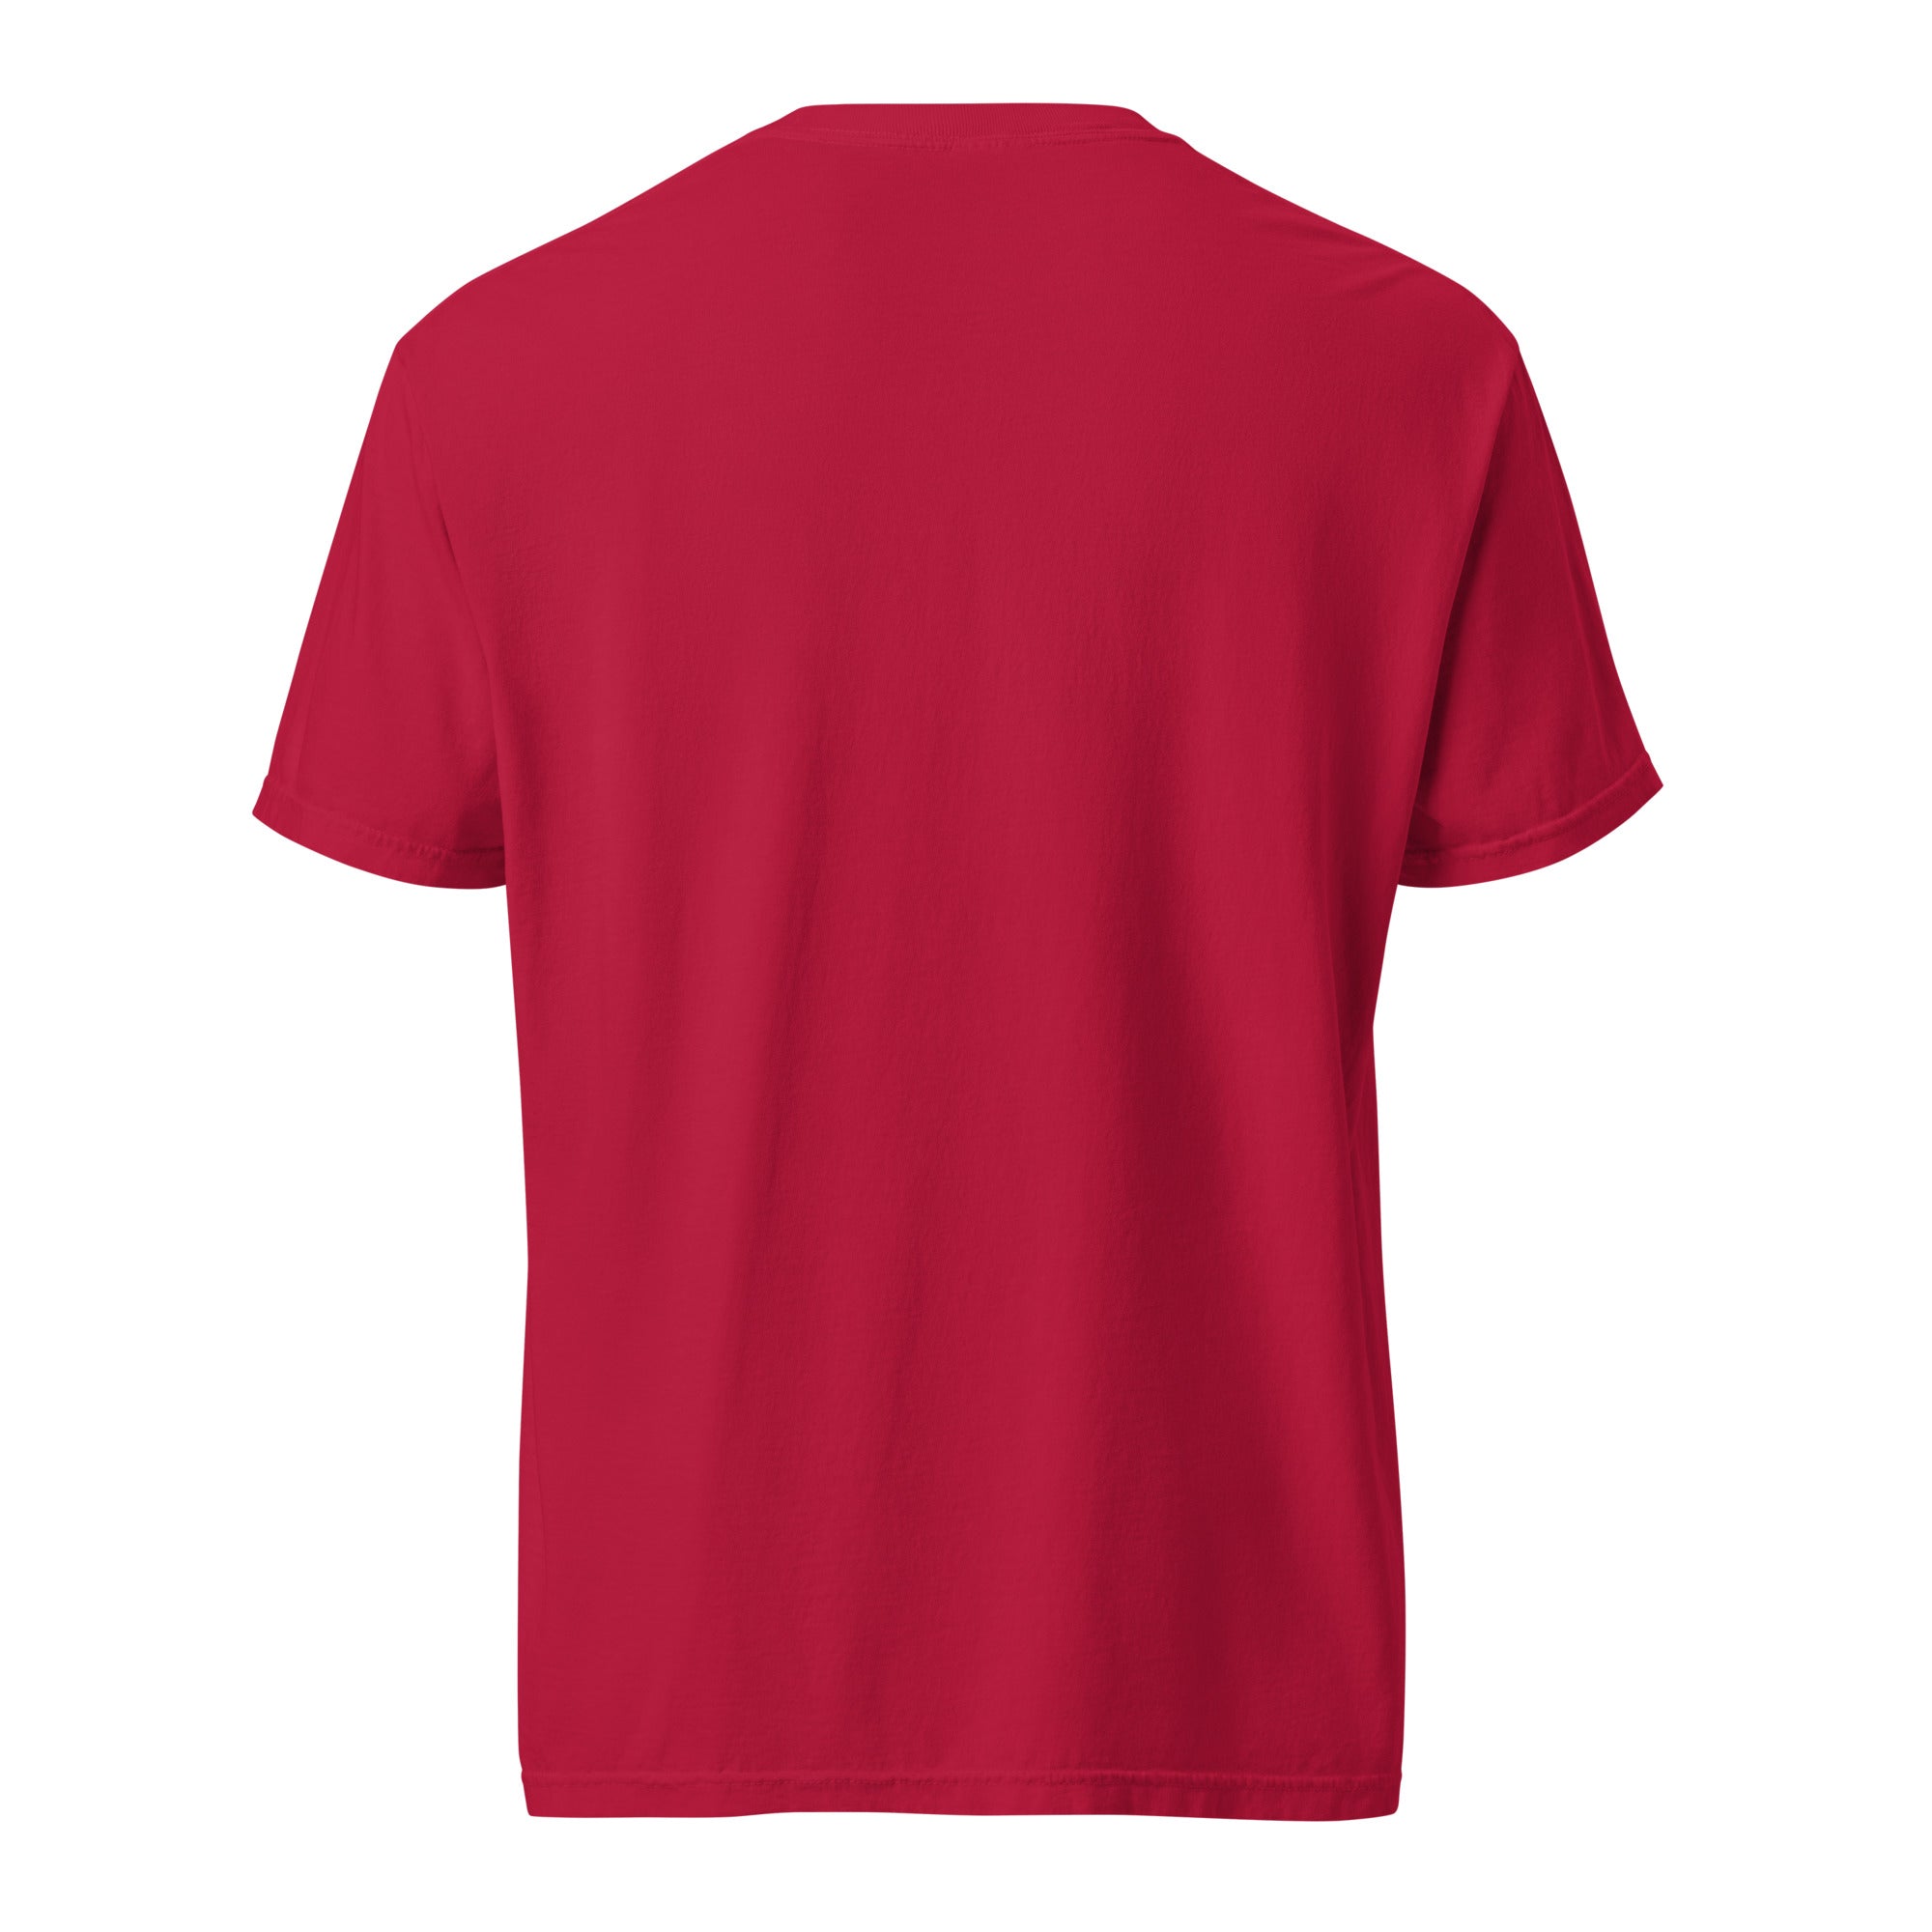 10 Year Anniversary Summer Collection Comfort Colors Tee - Red - SOARescue